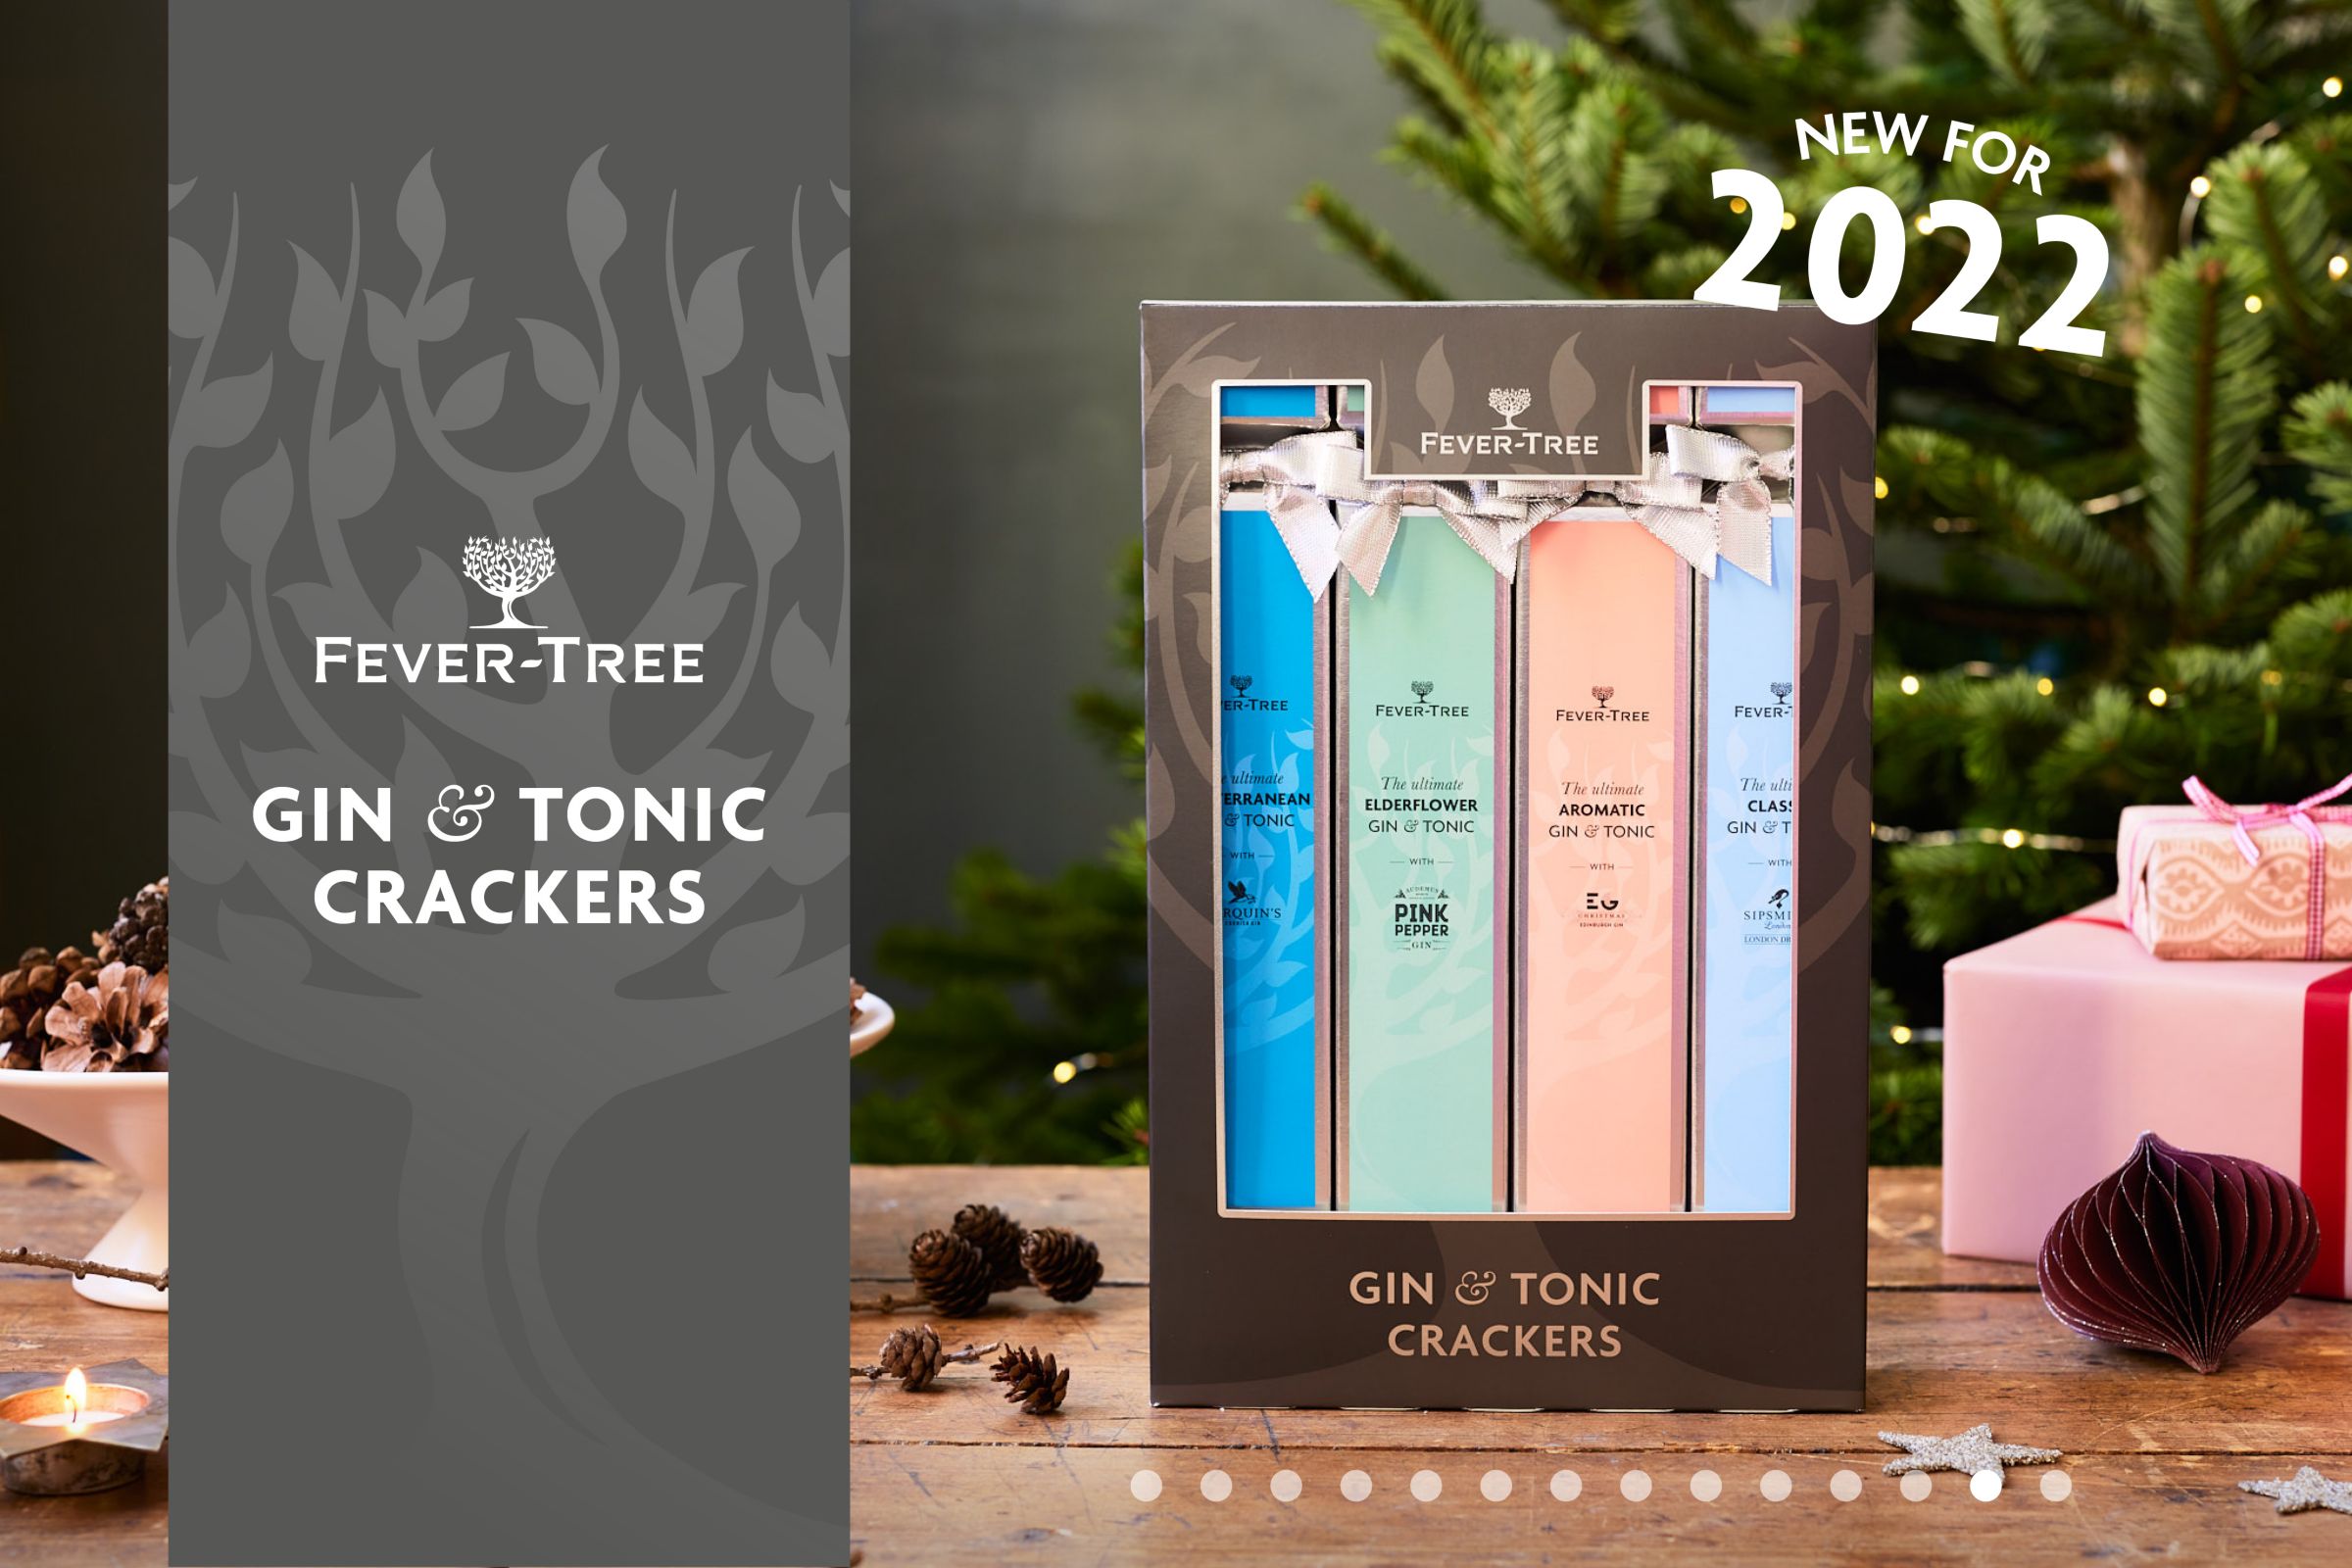 Buy Fever-Tree Gin and Tonic Pairing Crackers, Box of 4, 5cl & 150ml Online at johnlewis.com Buy Fever-Tree Gin and Tonic Pairing Crackers, Box of 4, 5cl & 150ml Online at johnlewis.com Buy Fever-Tree Gin and Tonic Pairing Crackers, Box of 4, 5cl & 150ml Online at johnlewis.com Buy Fever-Tree Gin and Tonic Pairing Crackers, Box of 4, 5cl & 150ml Online at johnlewis.com Buy Fever-Tree Gin and Tonic Pairing Crackers, Box of 4, 5cl & 150ml Online at johnlewis.com Fever-Tree Gin and Tonic Pairing Crackers, Box of 4, 5cl & 150ml